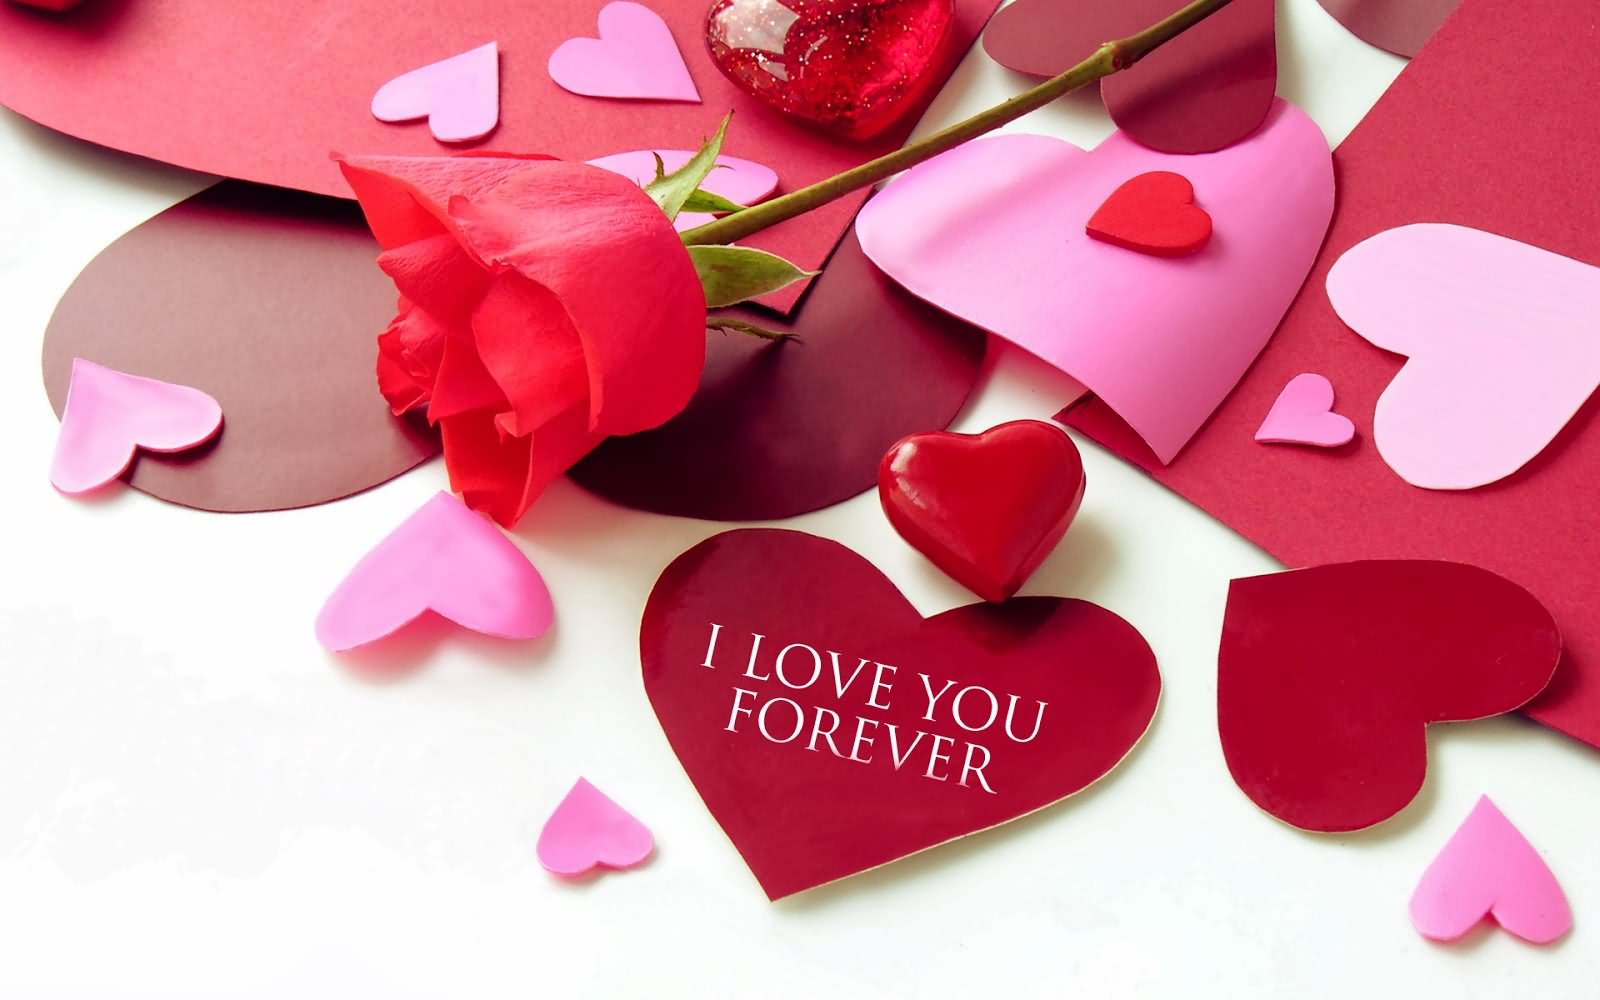 37 Best Love You Forever Images